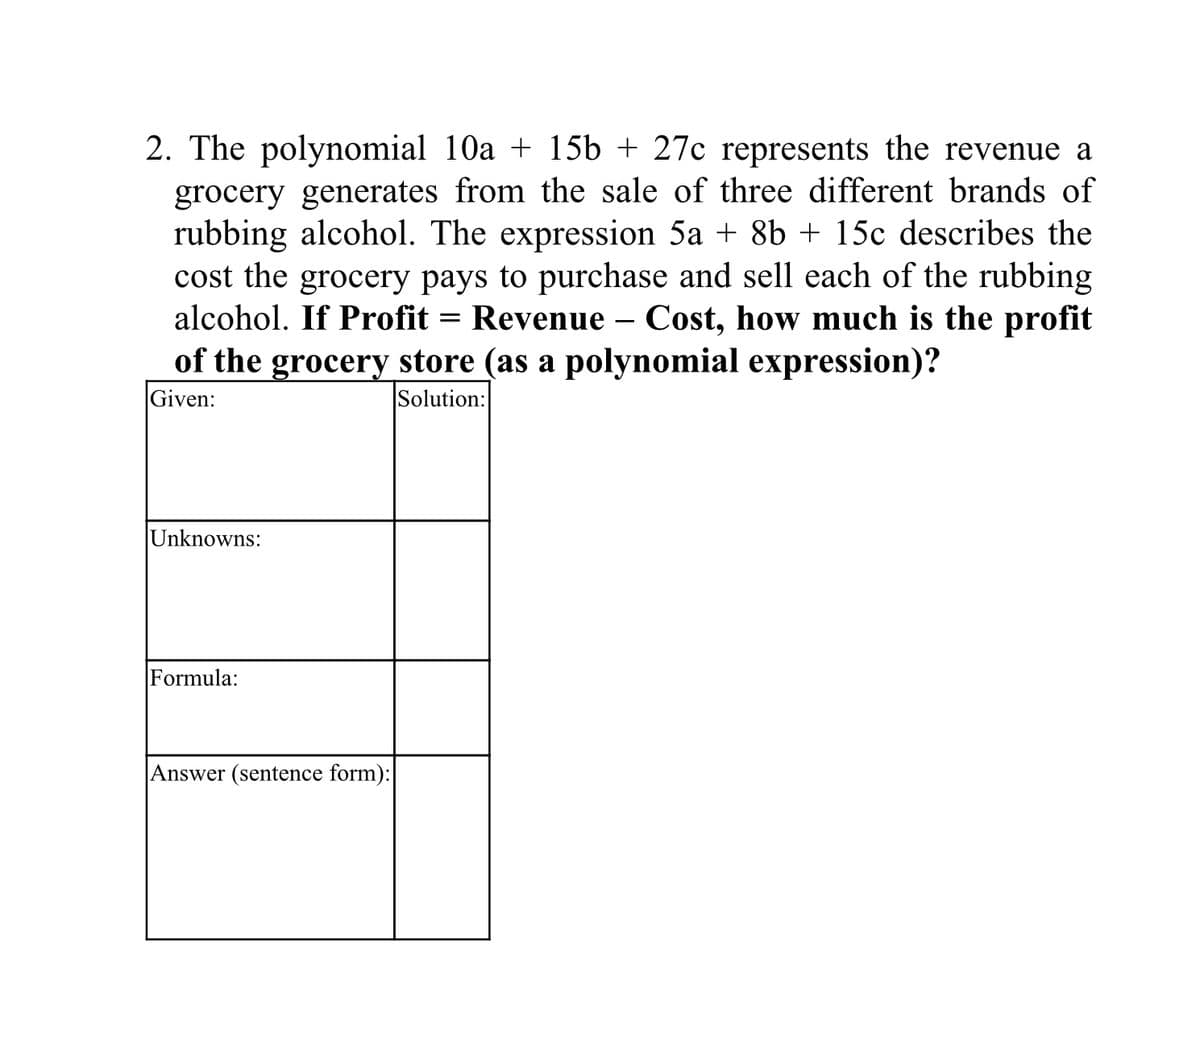 2. The polynomial 10a + 15b + 27c represents the revenue a
grocery generates from the sale of three different brands of
rubbing alcohol. The expression 5a + 8b + 15c describes the
cost the grocery pays to purchase and sell each of the rubbing
alcohol. If Profit = Revenue – Cost, how much is the profit
of the grocery store (as a polynomial expression)?
Given:
Solution:
Unknowns:
Formula:
Answer (sentence form):
